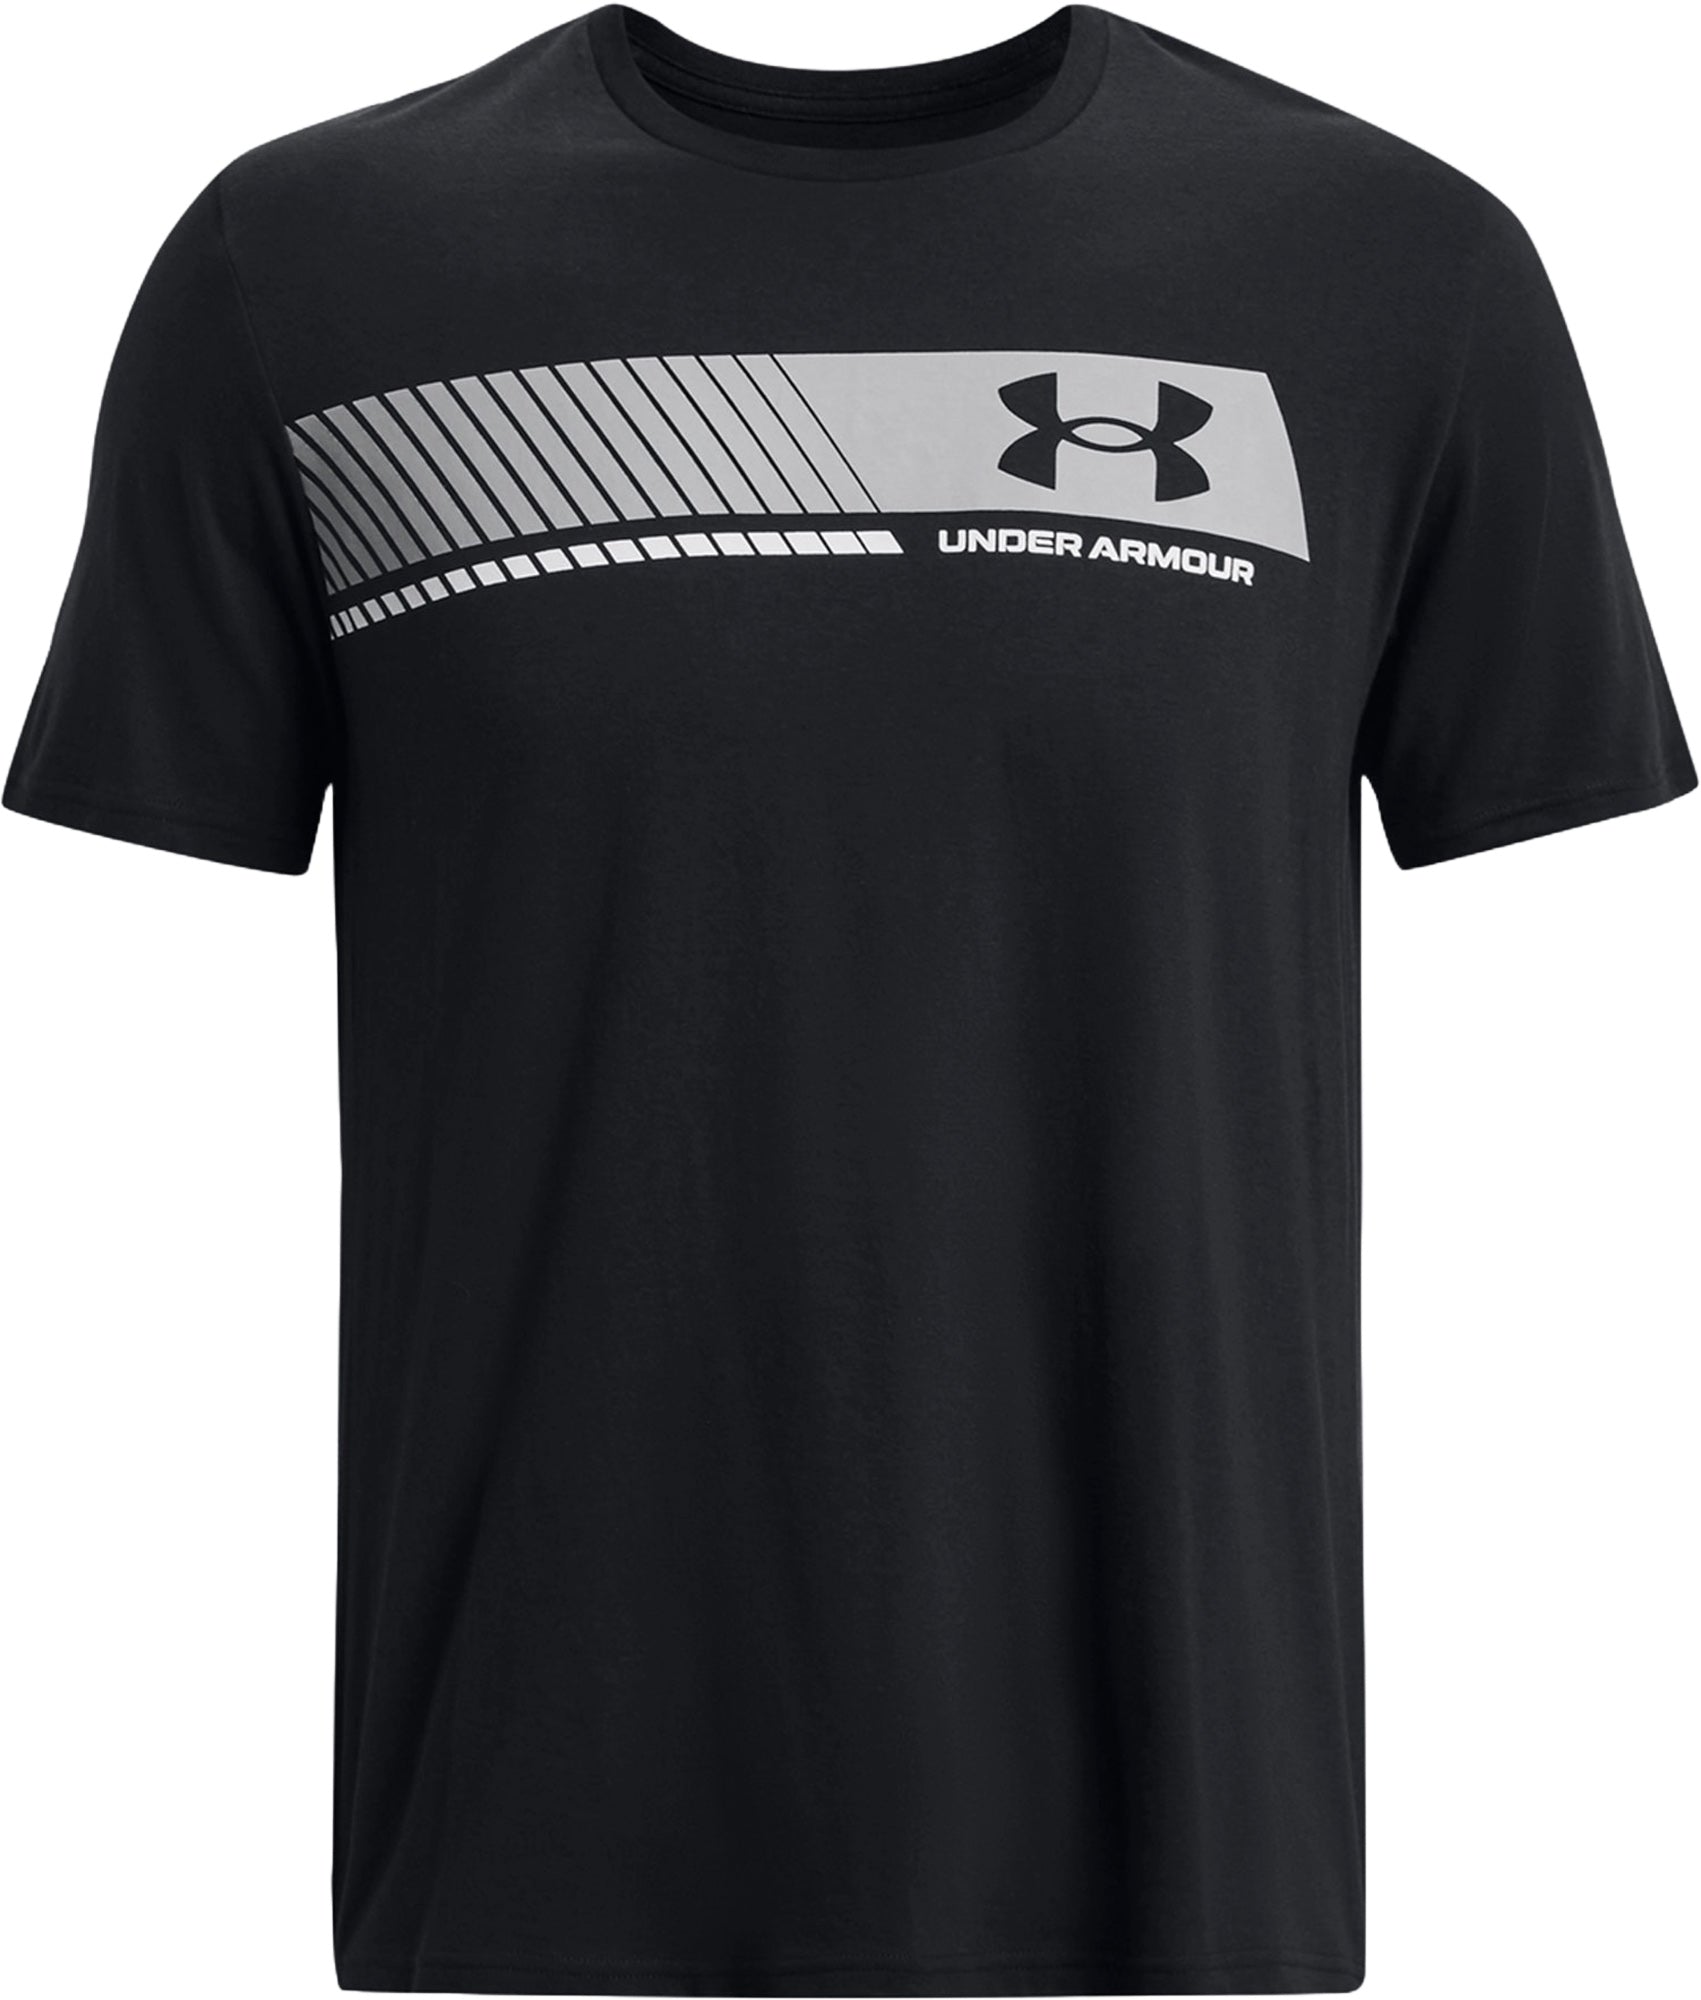 Men's Baseball Graphic Short Sleeve T-Shirt from Under Armour